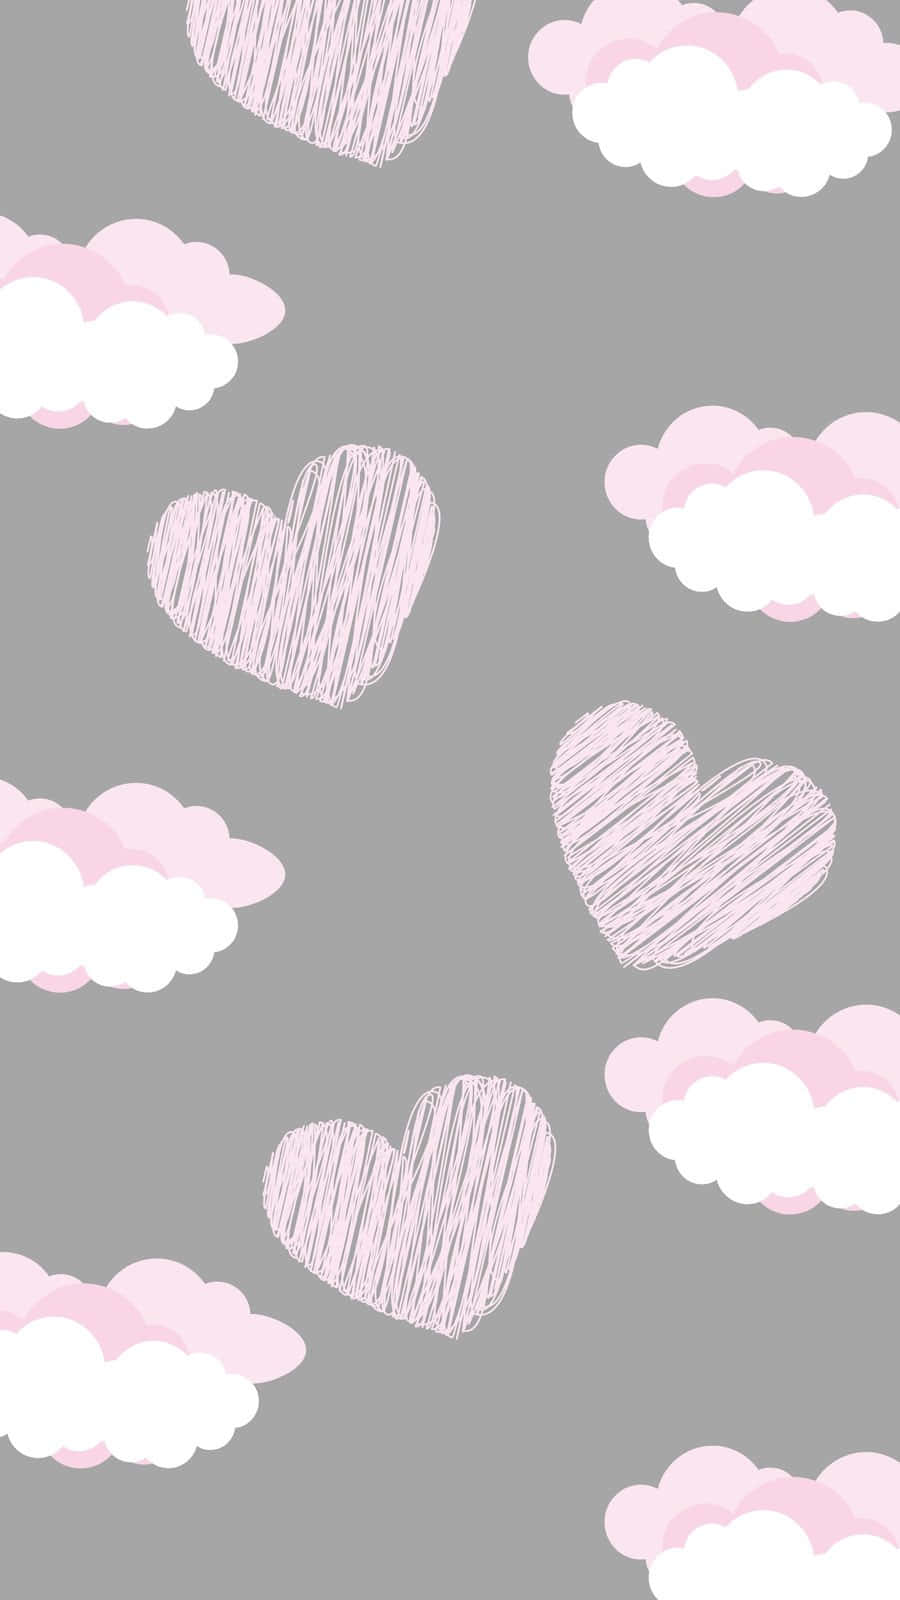 Pink And Gray Clouds With Hearts Wallpaper